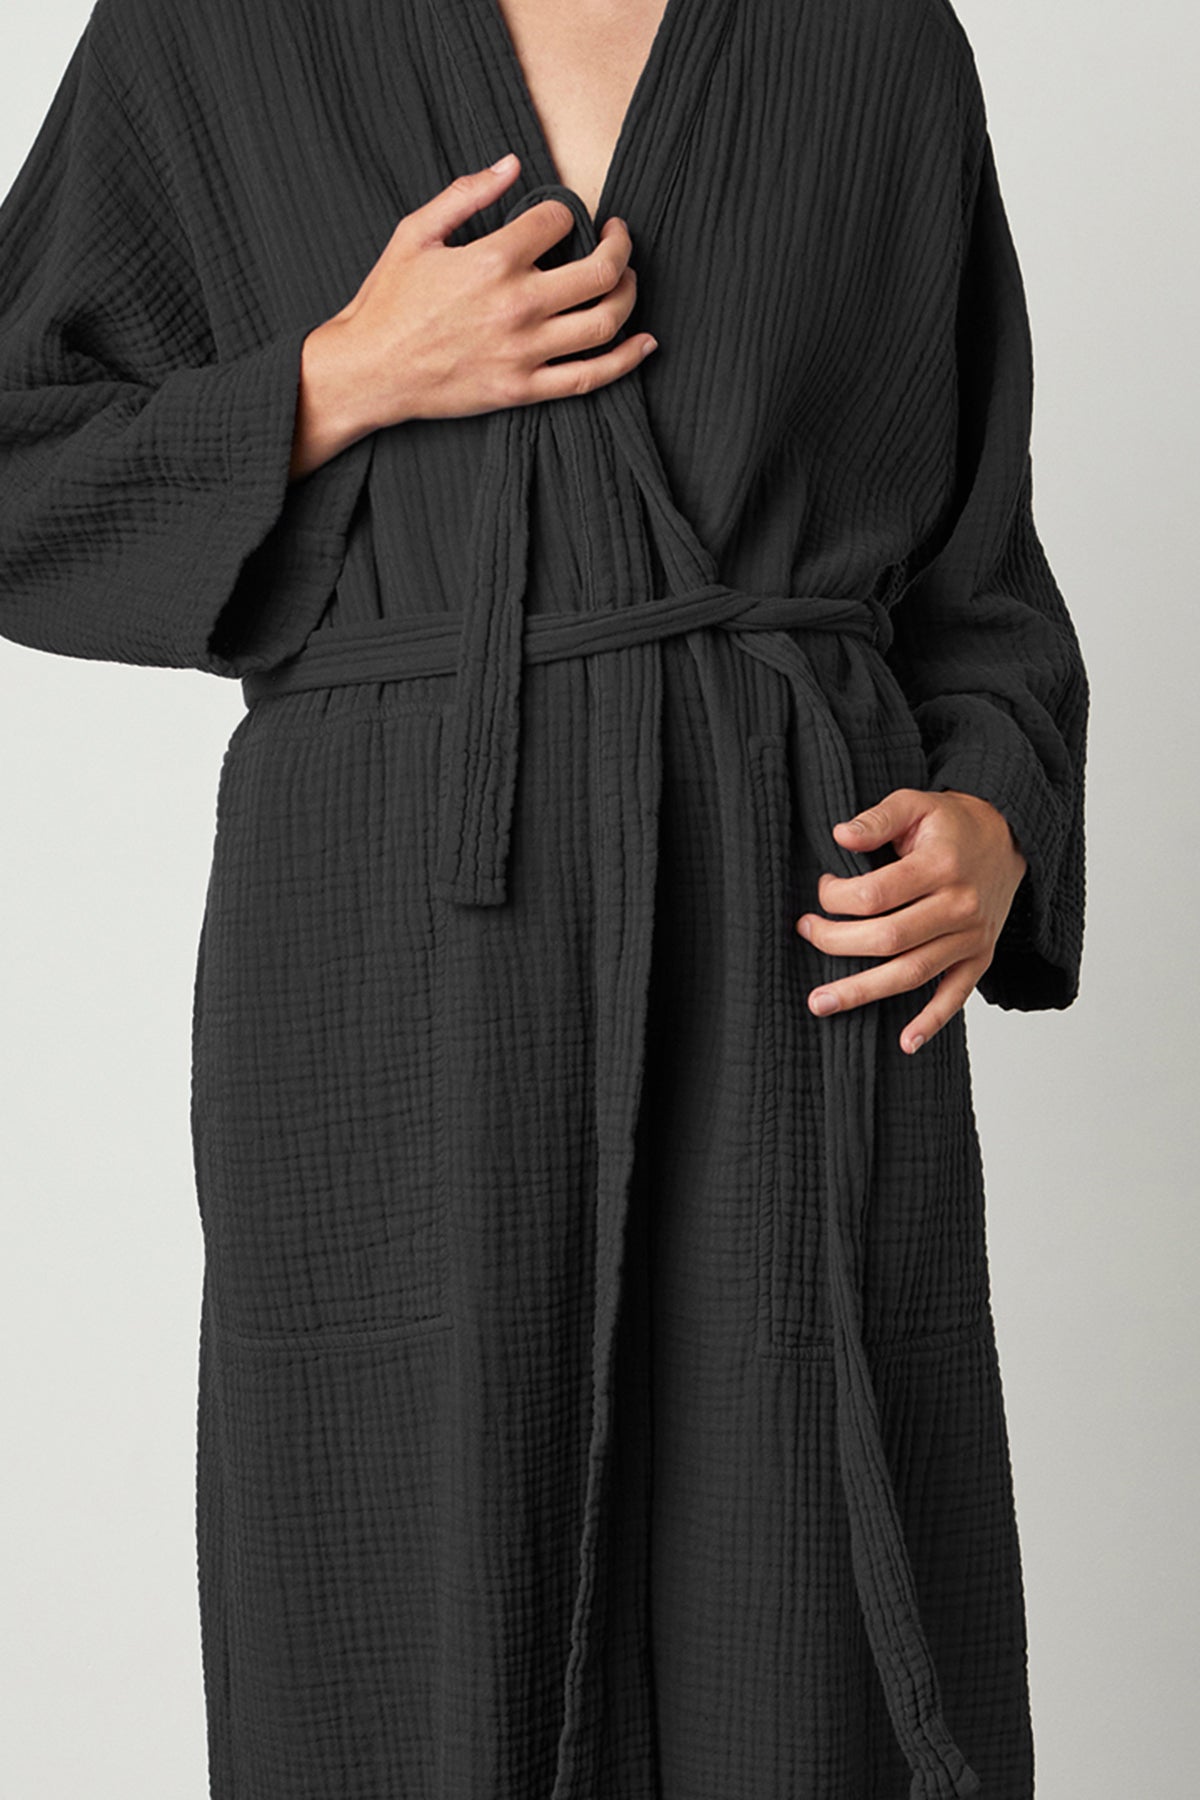 A woman wearing a Jenny Graham Home Cotton Gauze Robe with a belt.-23556219830465